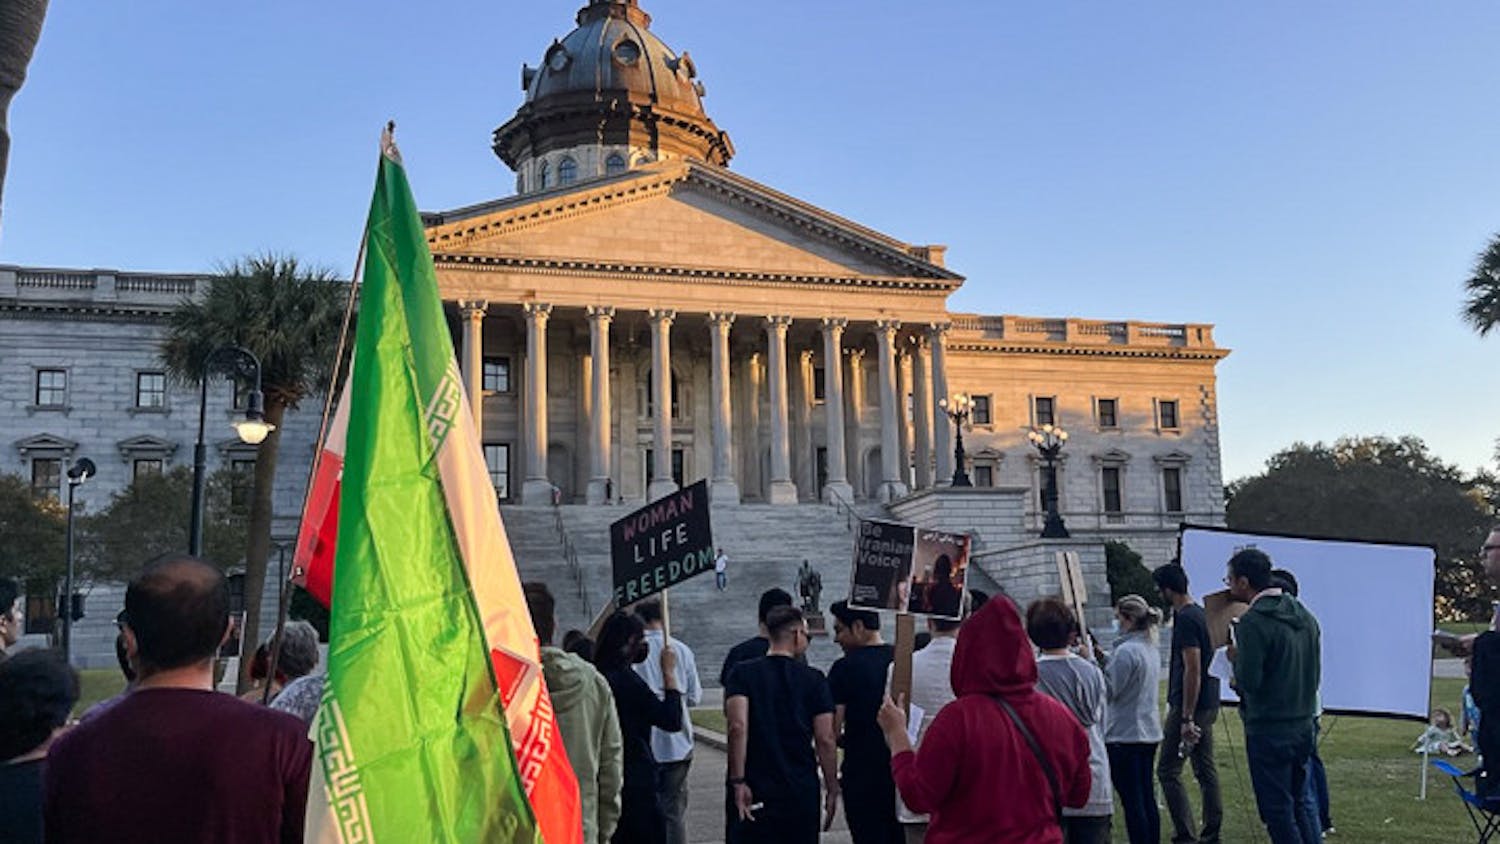 Columbia residents gather in front of the statehouse with Iranian flags and protest signs on Oct. 4, 2022. The USC Iranian Student Association held a protest at the statehouse to show solidarity with their country's women.